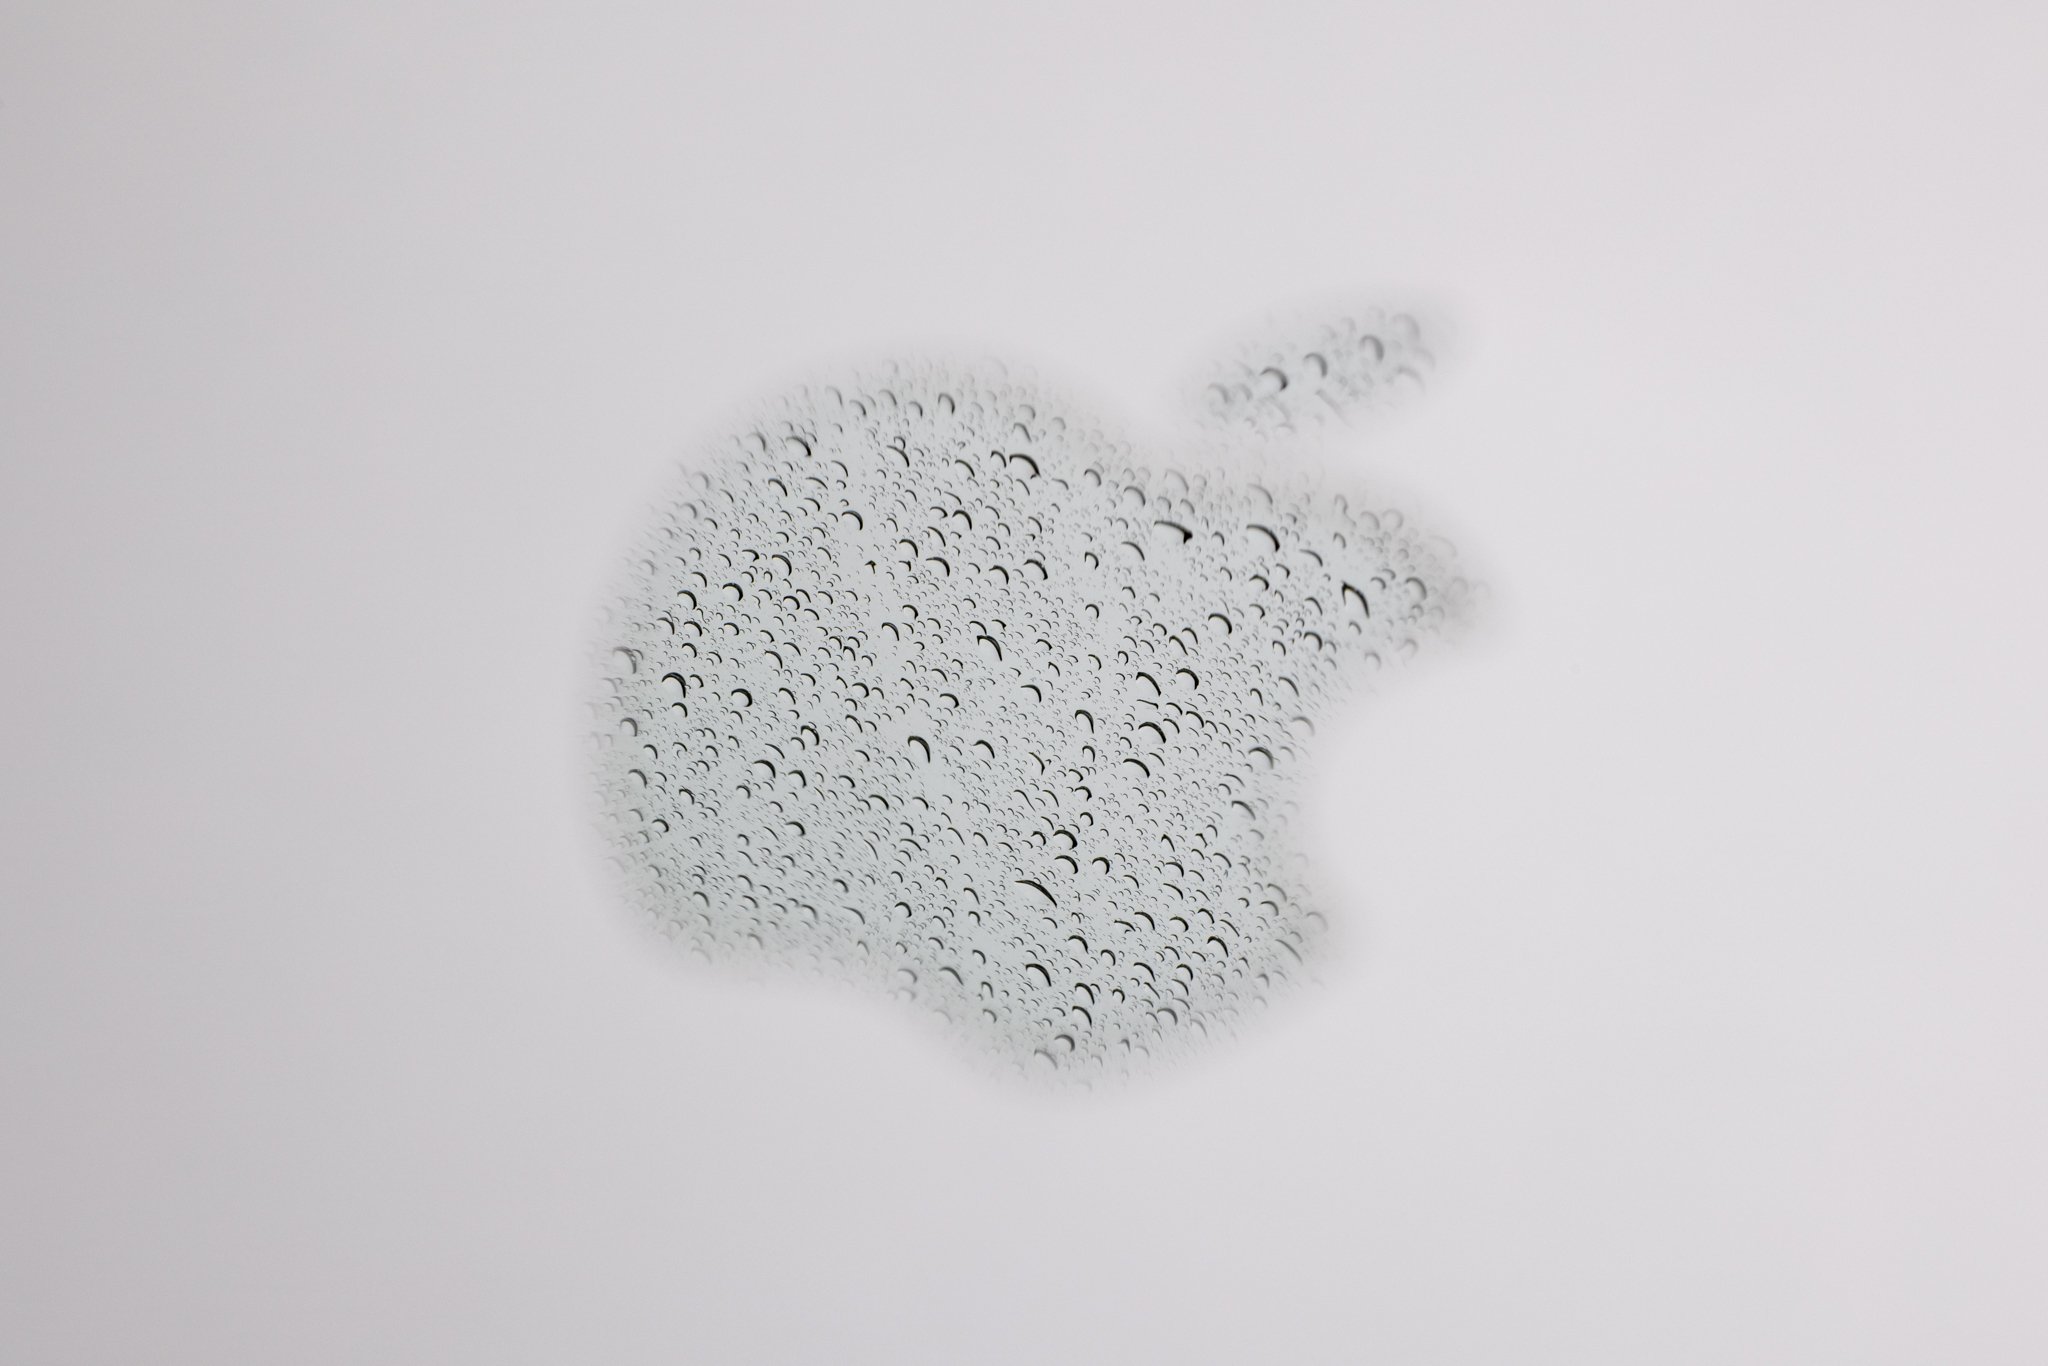 A reflection of rain in the Apple logo on a laptop photographed at f/18